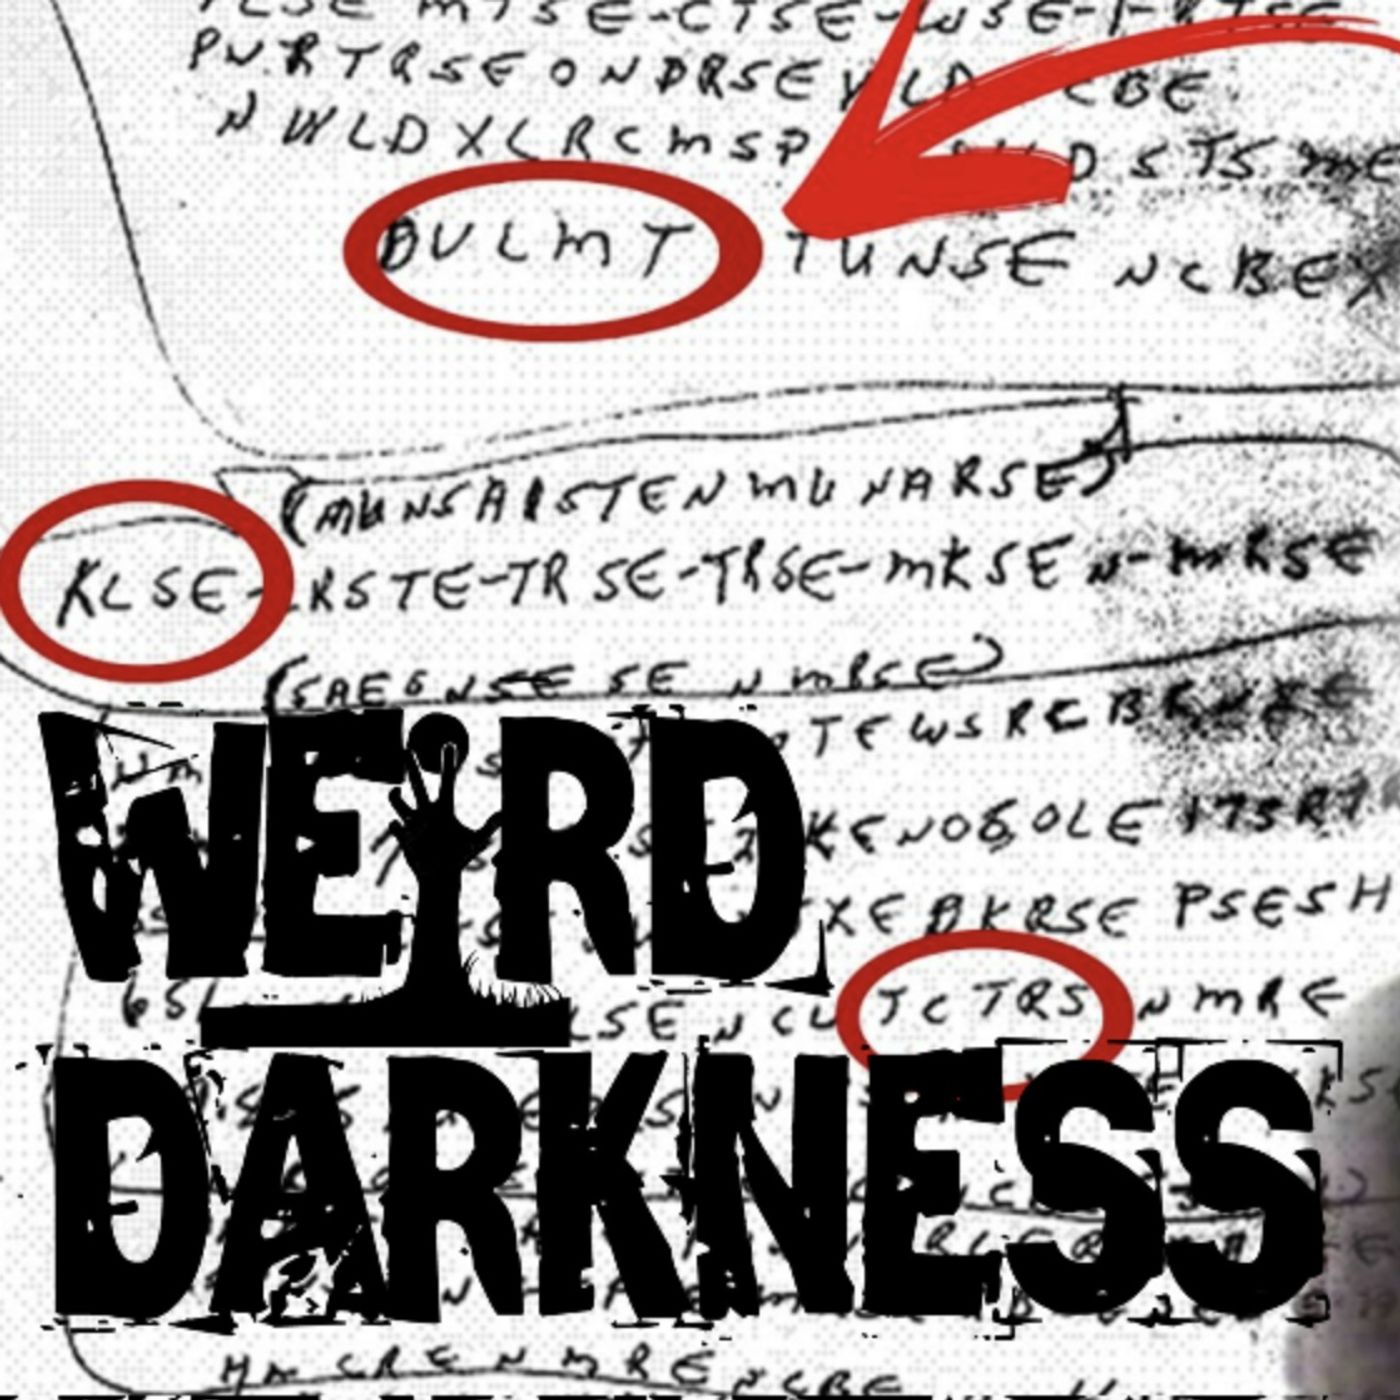 “THE UNSOLVED MYSTERY OF THE CIPHER IN THE CORN” And More True Stories! #WeirdDarkness #Darkives